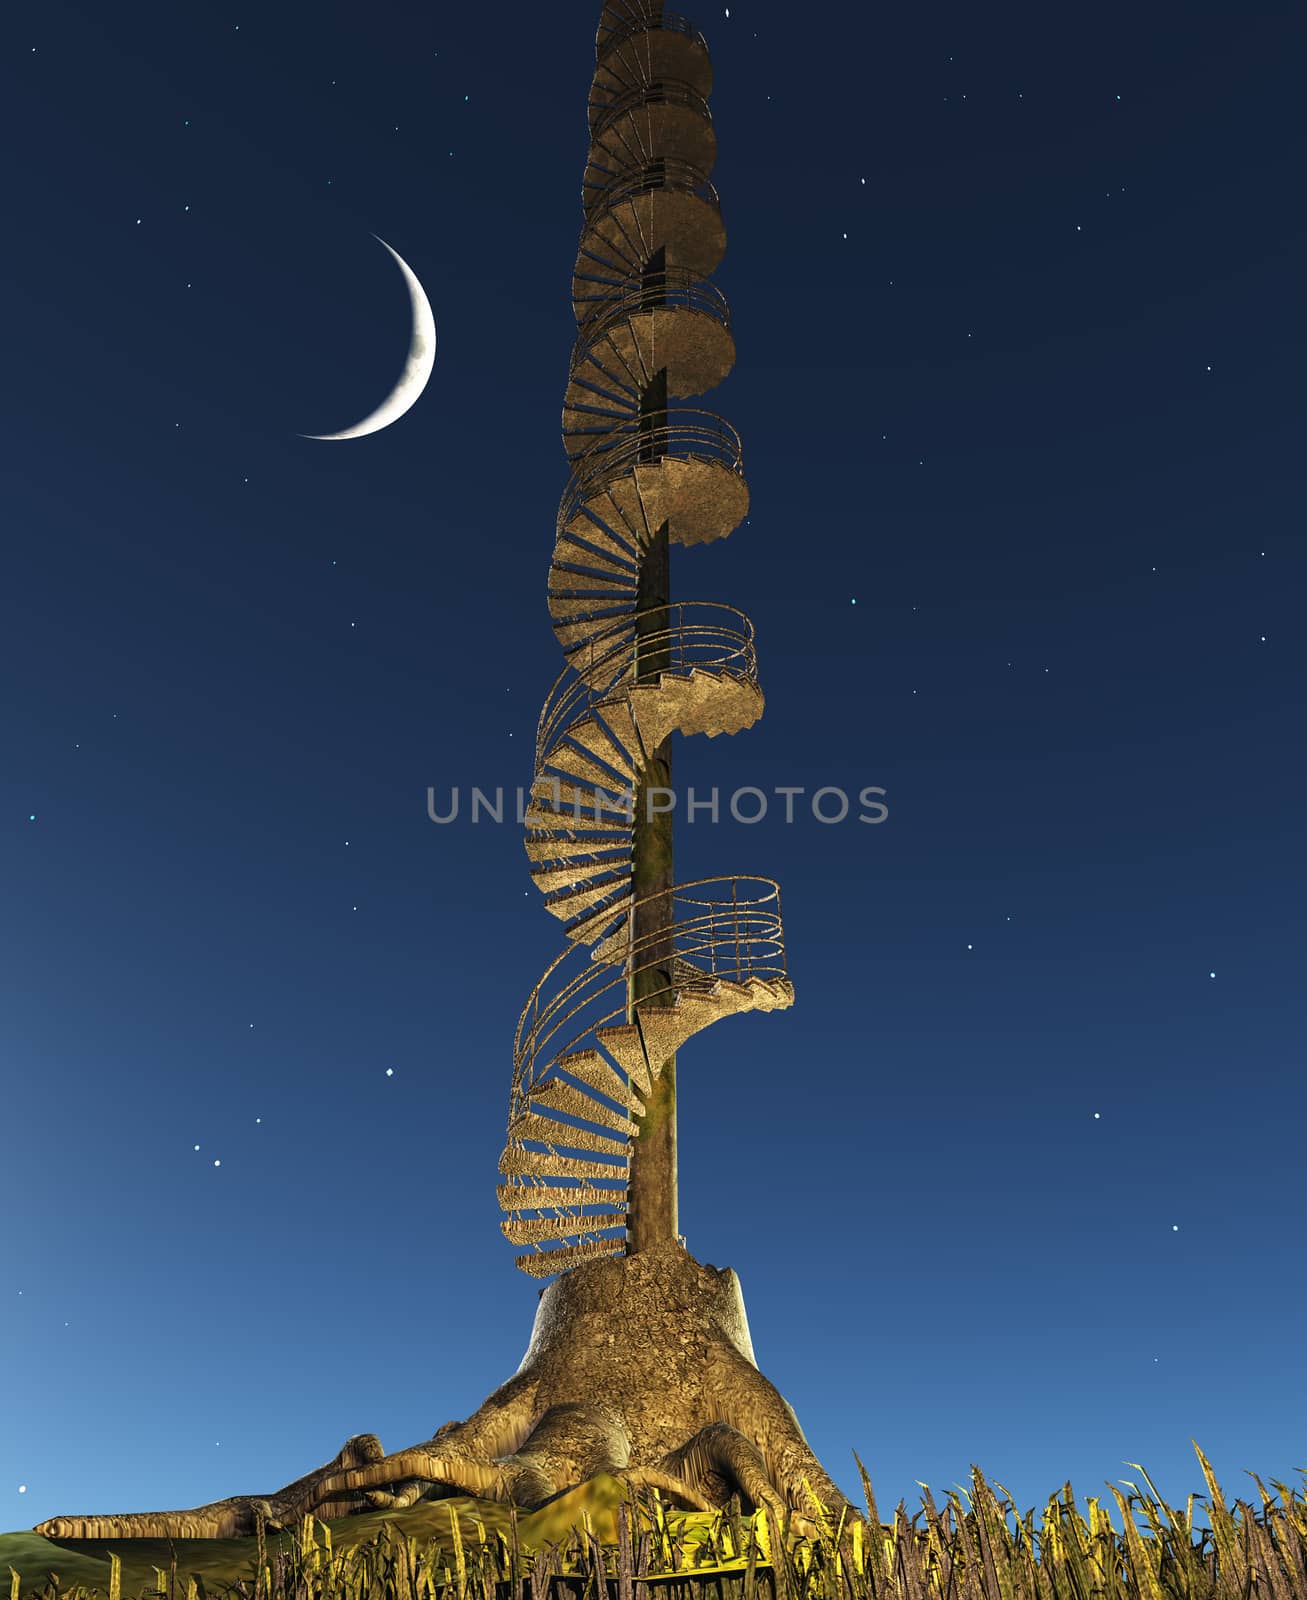 Circular Staircase rises into twilight sky from Tree Stump. 3D rendering